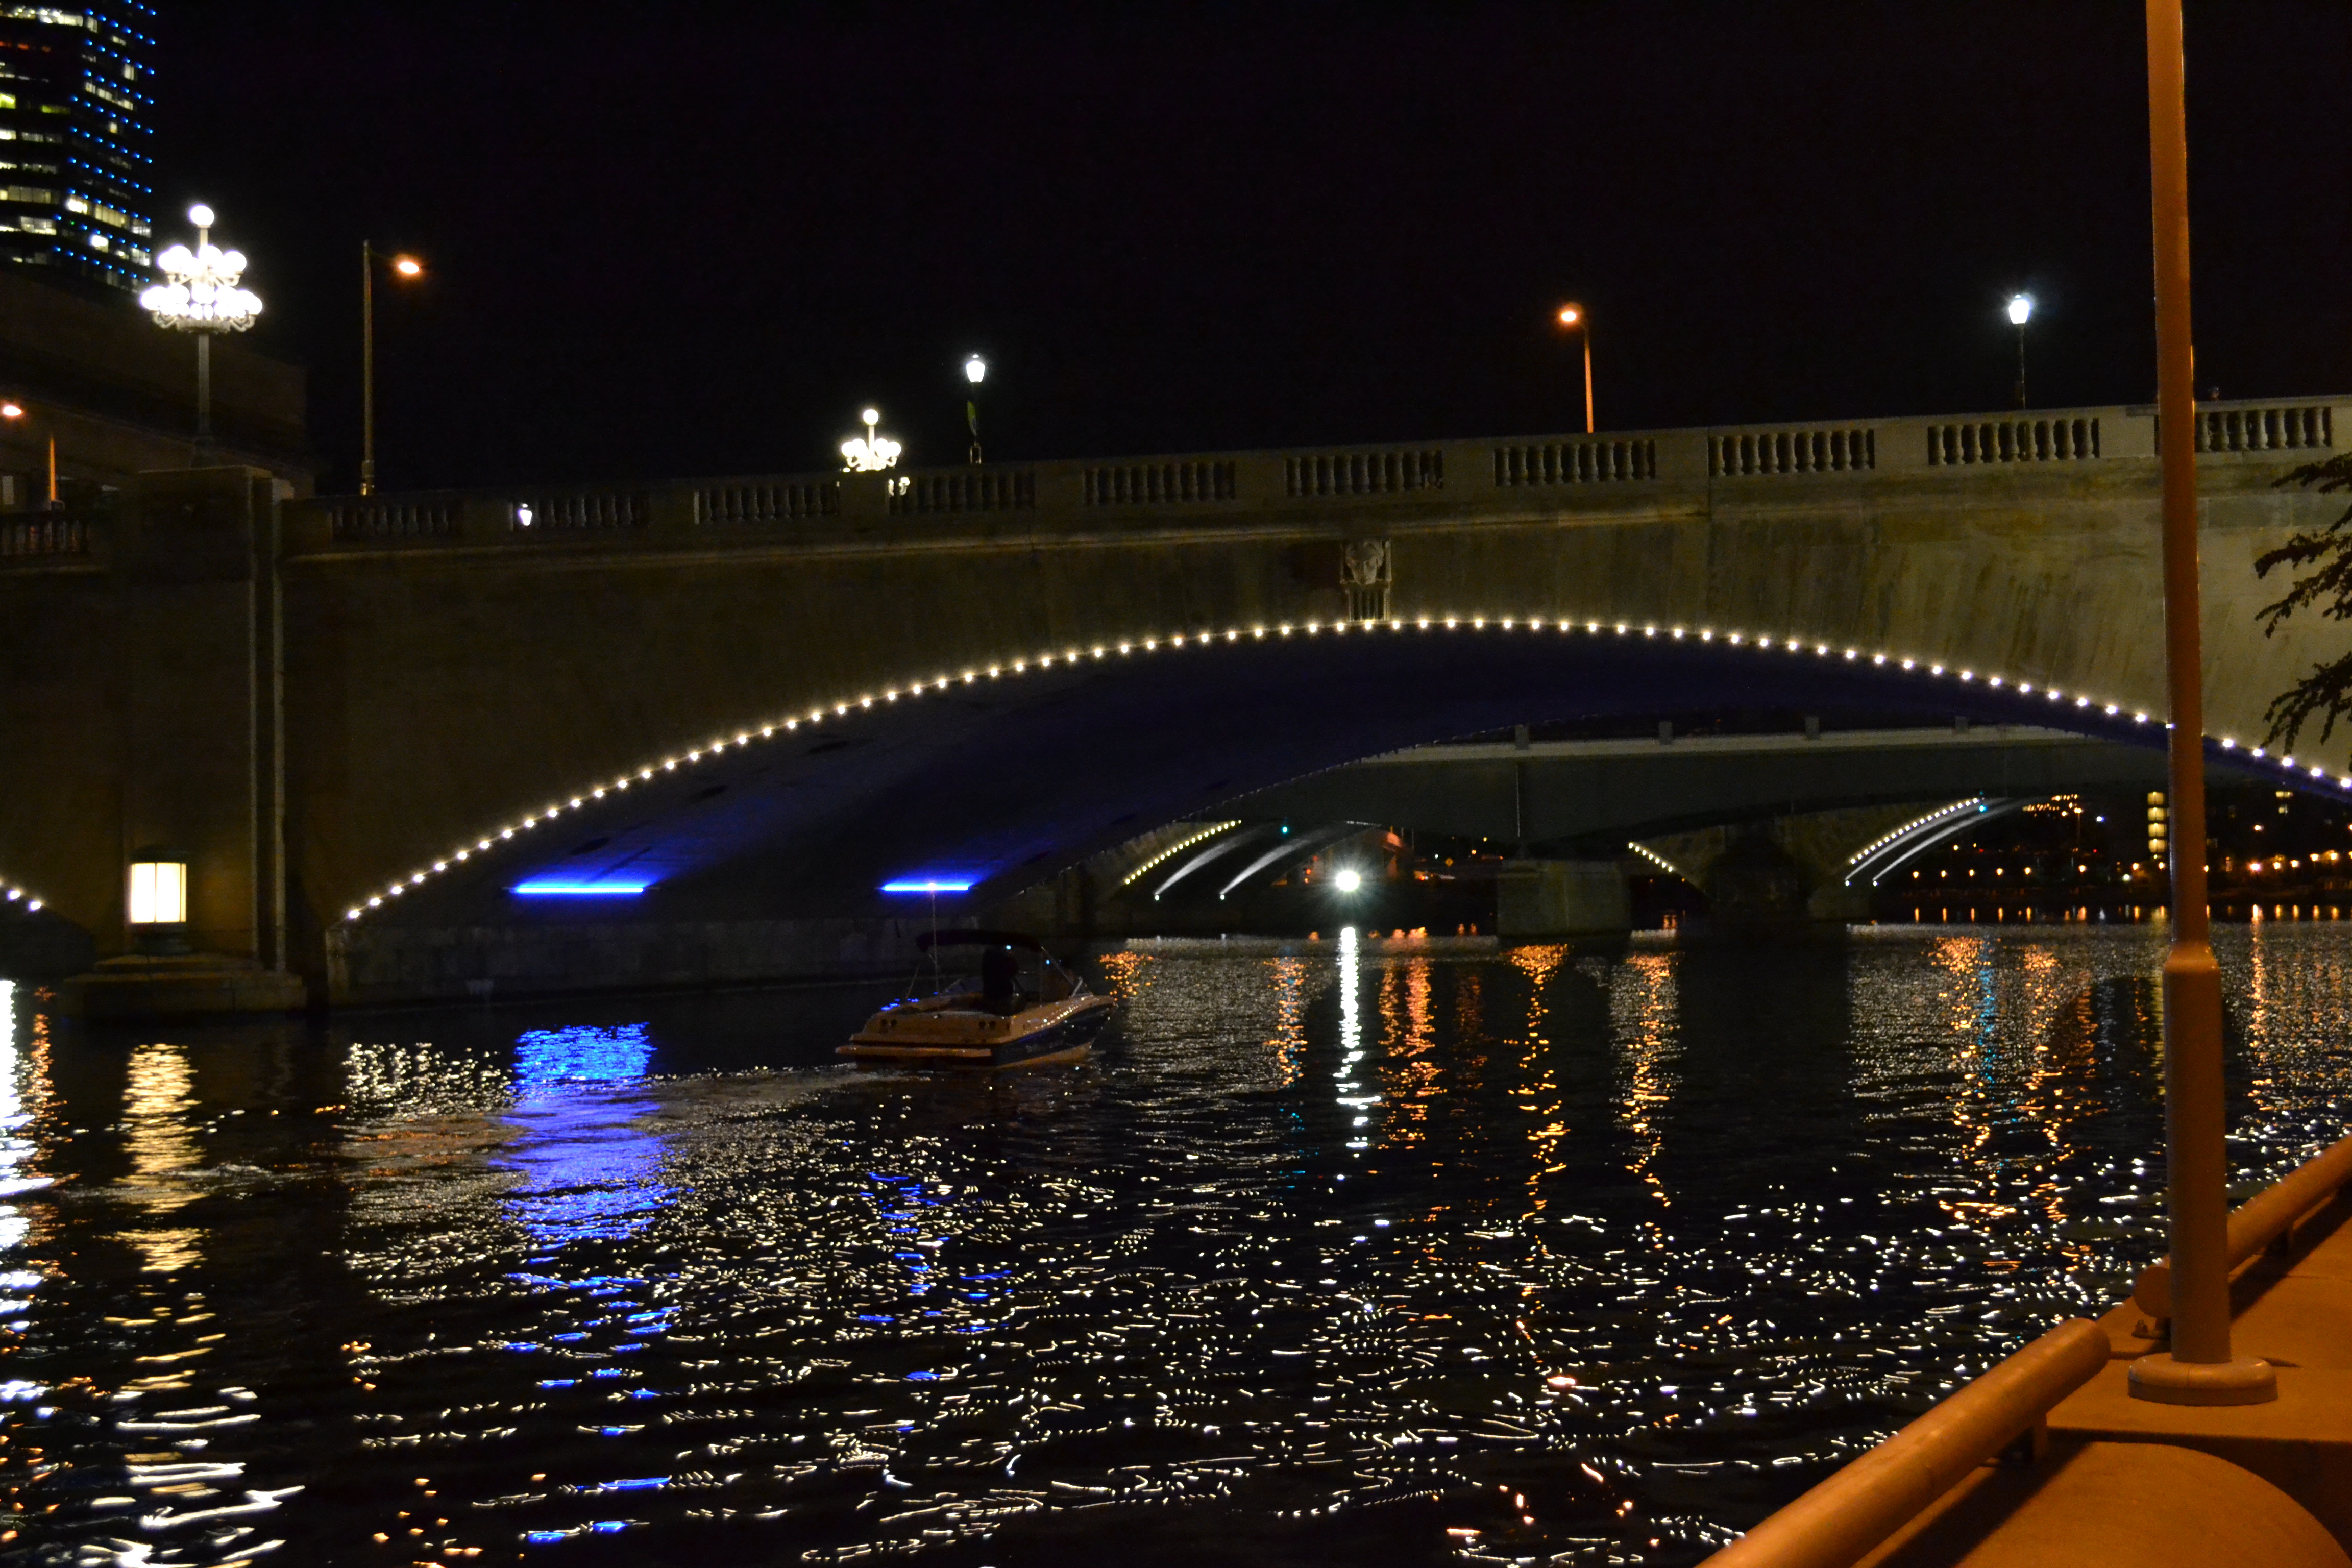 A boat cruised beneath the illuminated bridges as the lights danced on the water